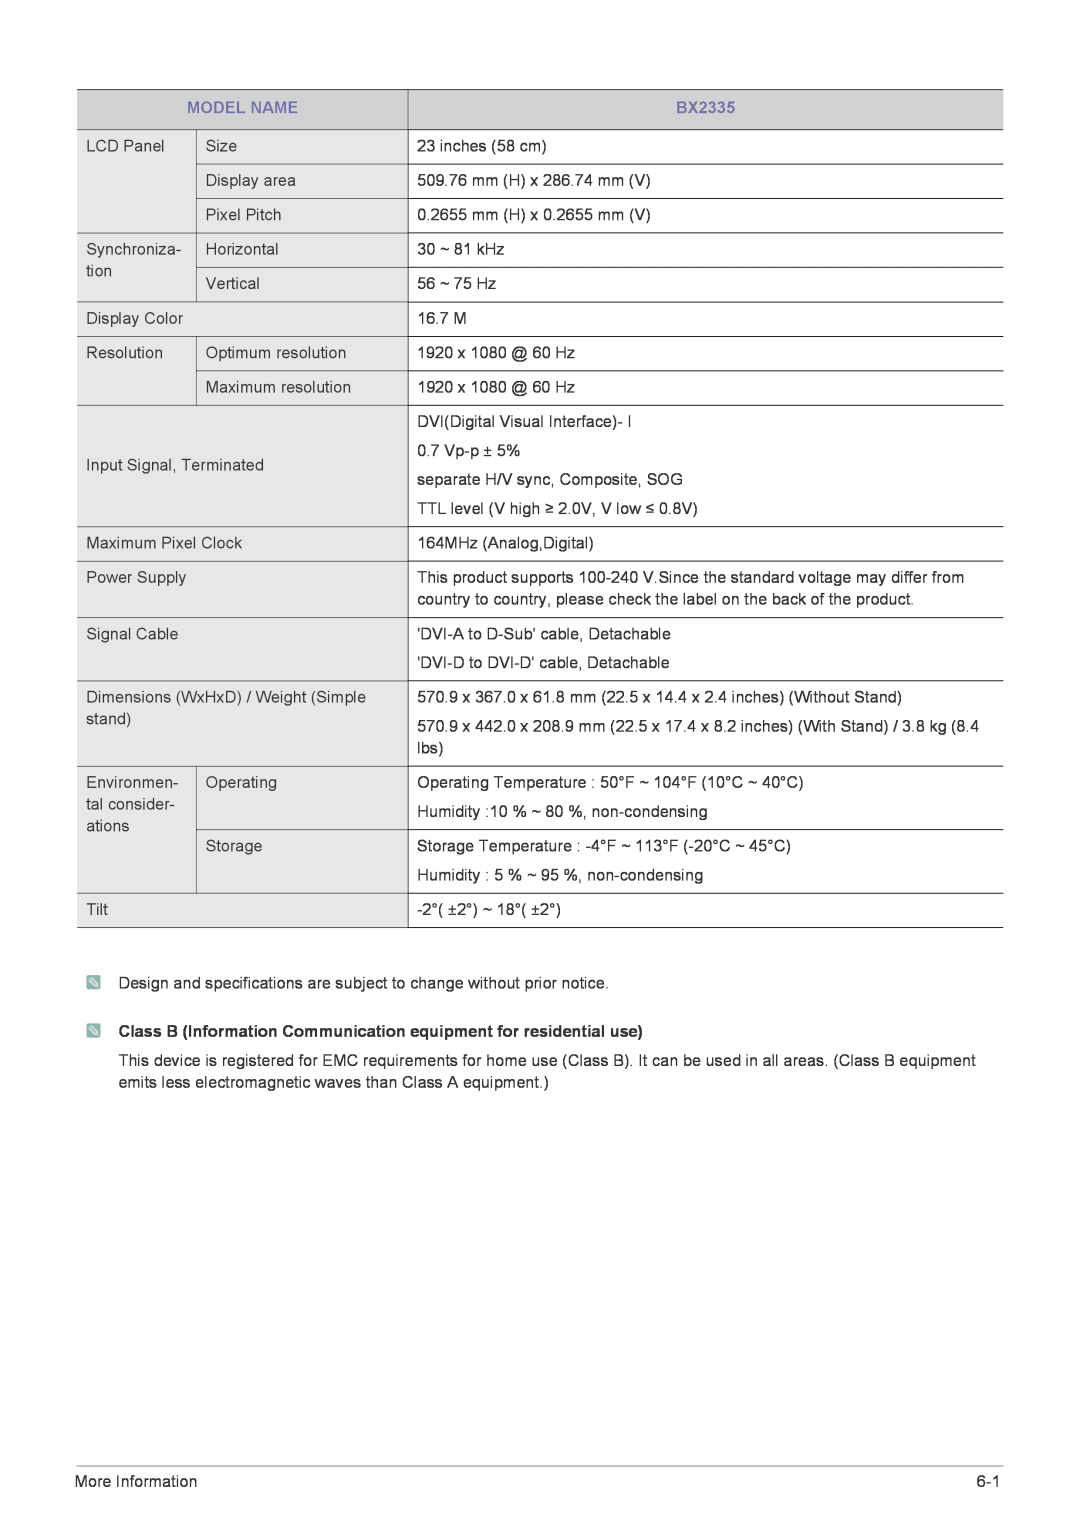 Samsung BX2035 user manual BX2335, Model Name, Class B Information Communication equipment for residential use 